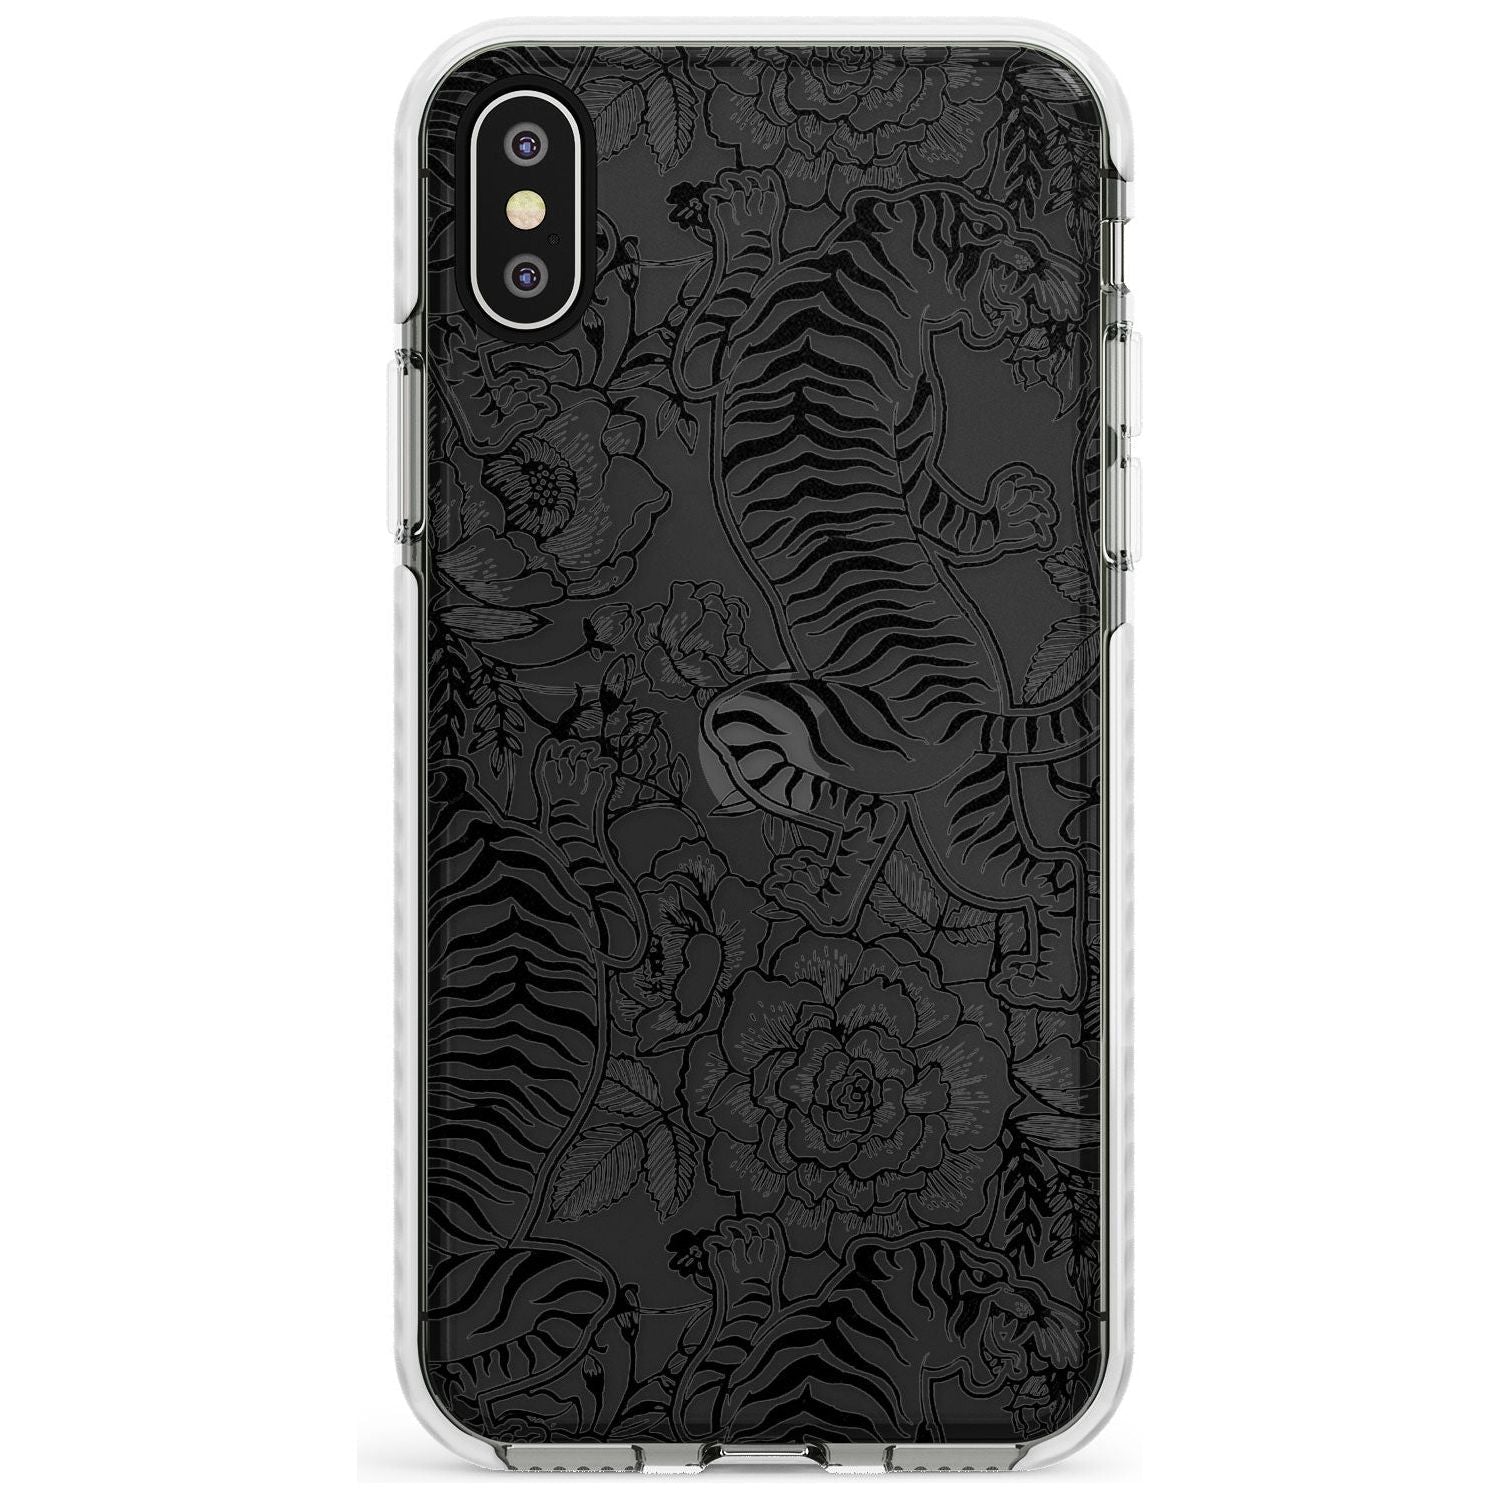 Personalised Chinese Tiger Pattern Impact Phone Case for iPhone X XS Max XR